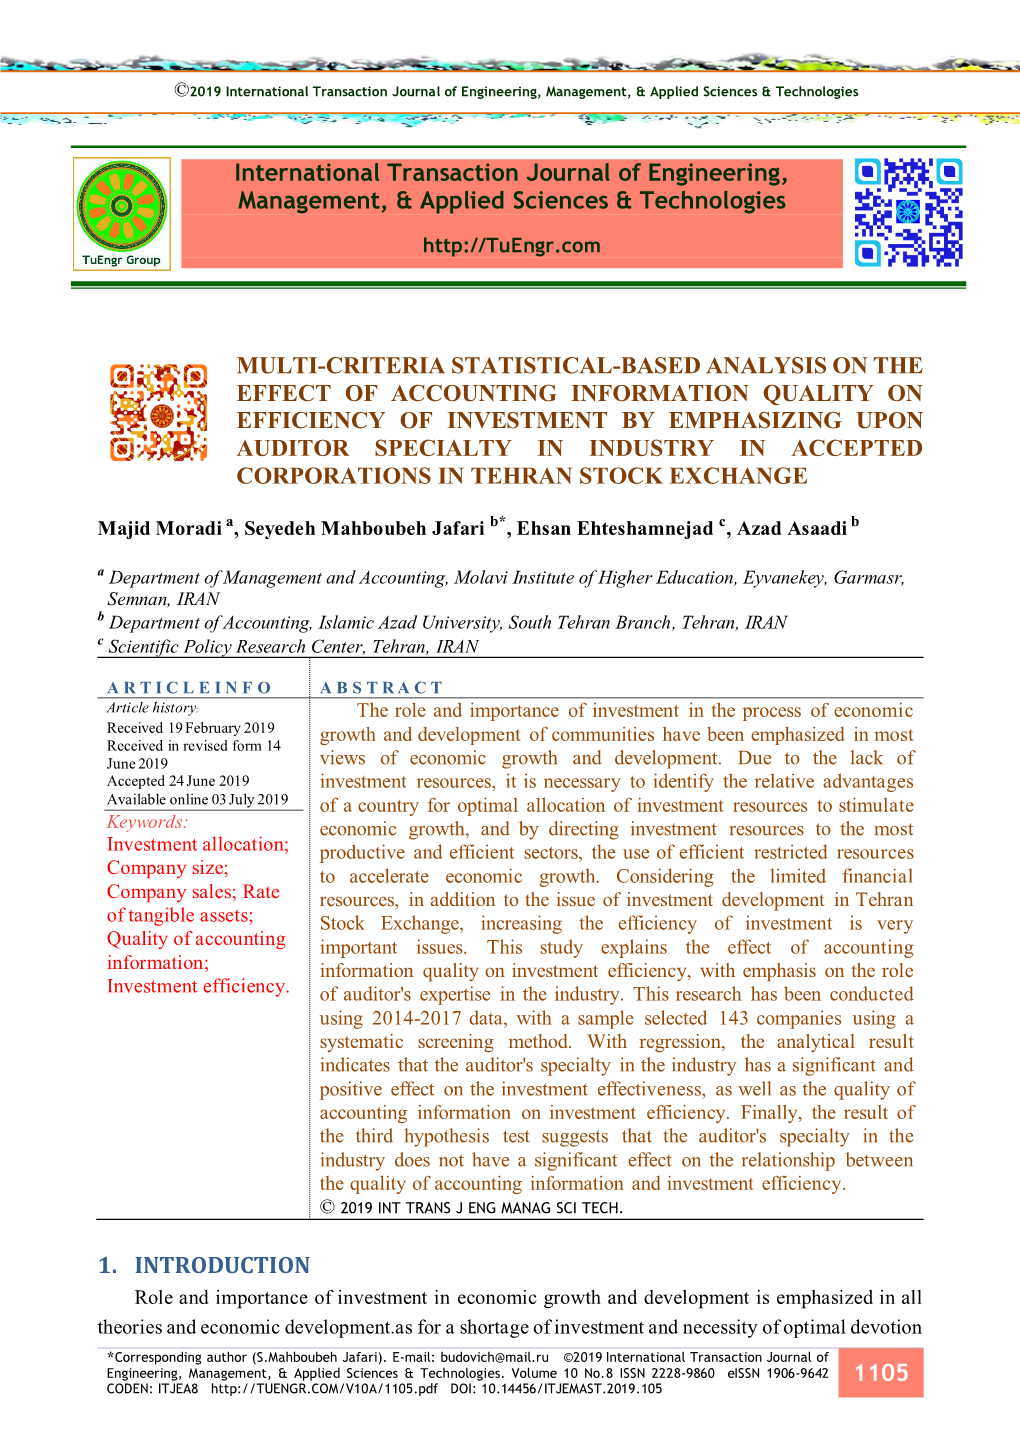 Multi-Criteria Statistical-Based Analysis on the Effect of Accounting Information Quality on Efficiency of Investment by Emphasi